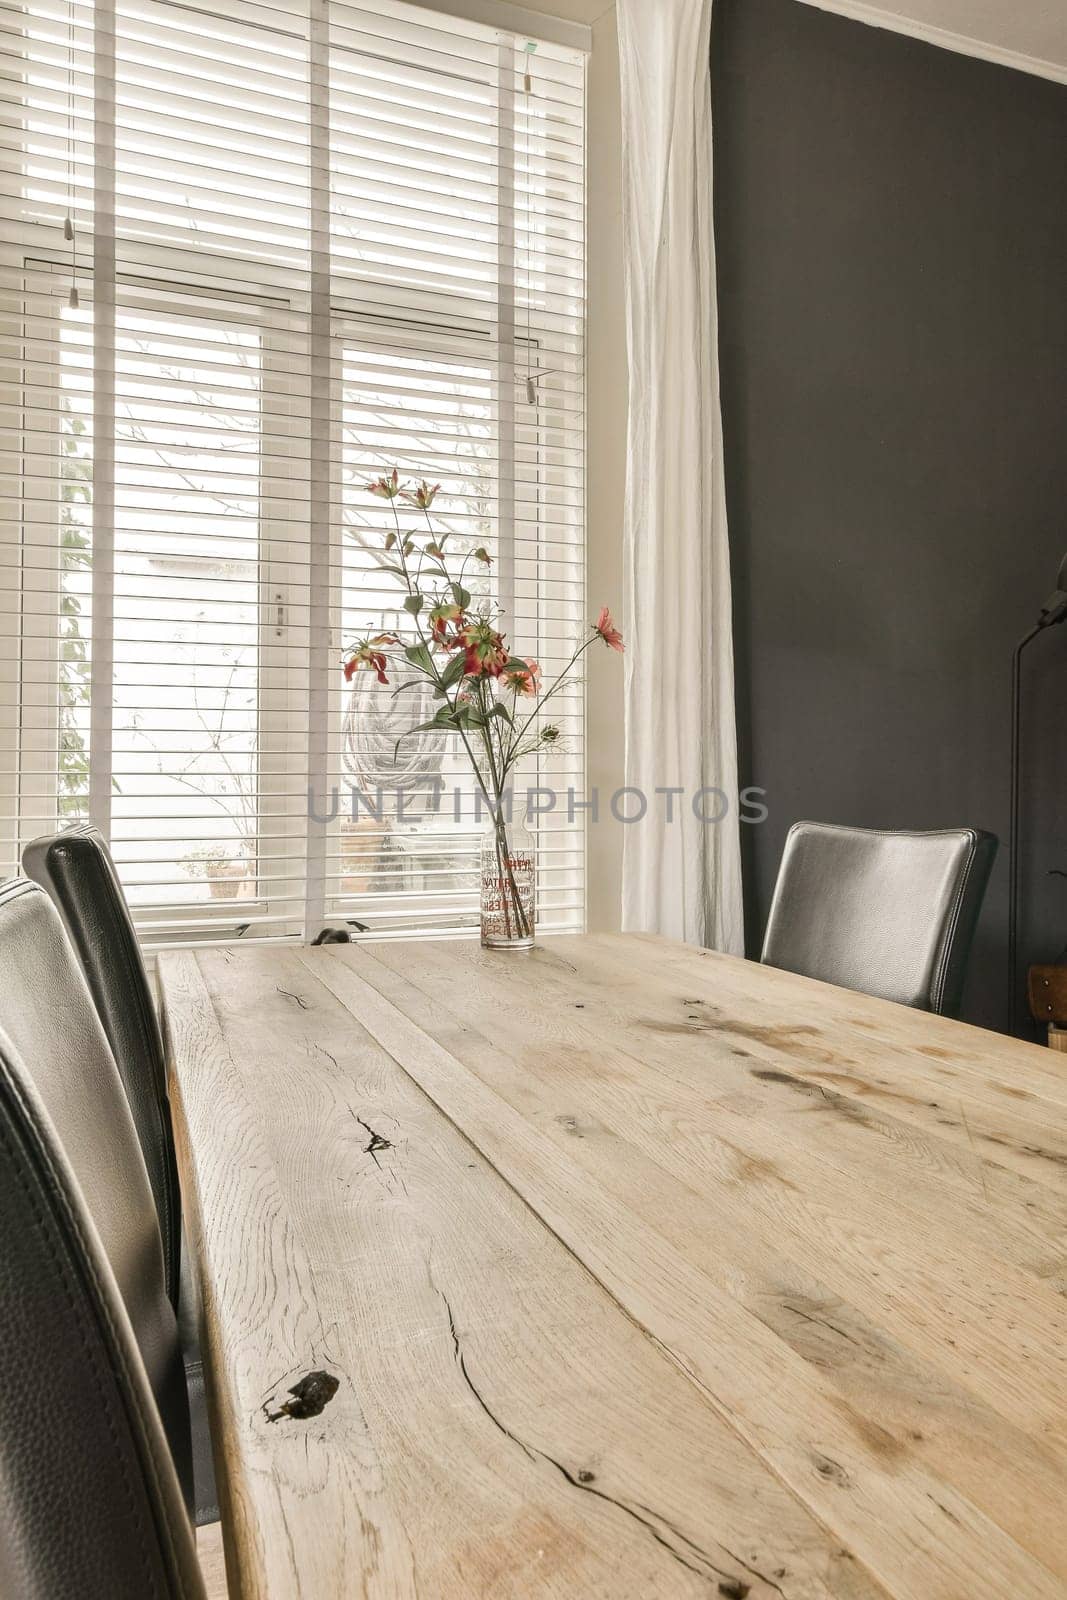 a dining table and chairs in a room with white blinds on the window behind it is a vase of flowers